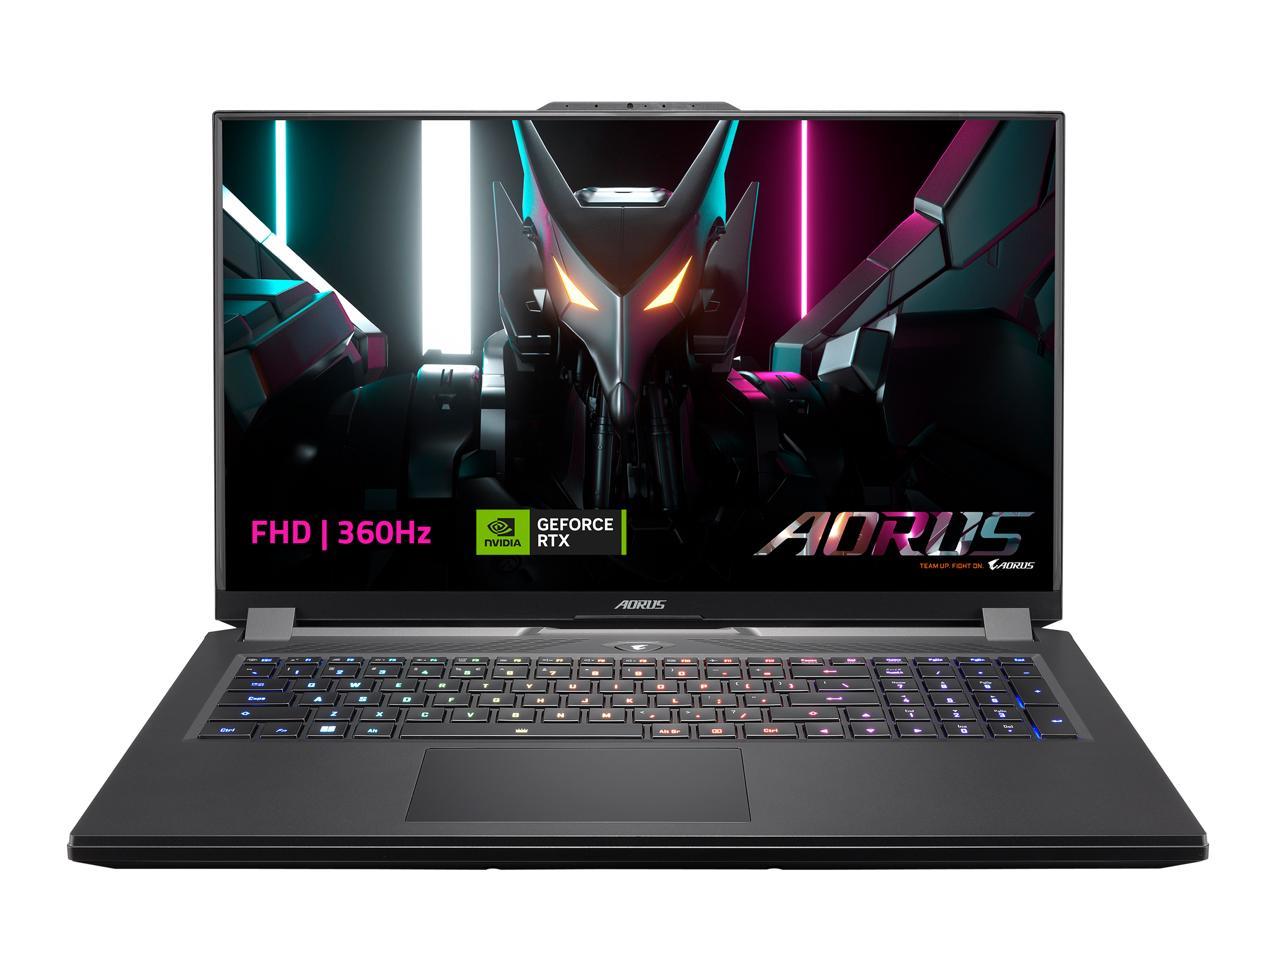 DELA DISCOUNT 8jUSBYrBmYK4MvnAHEHbvQ Where to buy an RTX 4080 or RTX 4090 gaming laptop — now shipping DELA DISCOUNT  